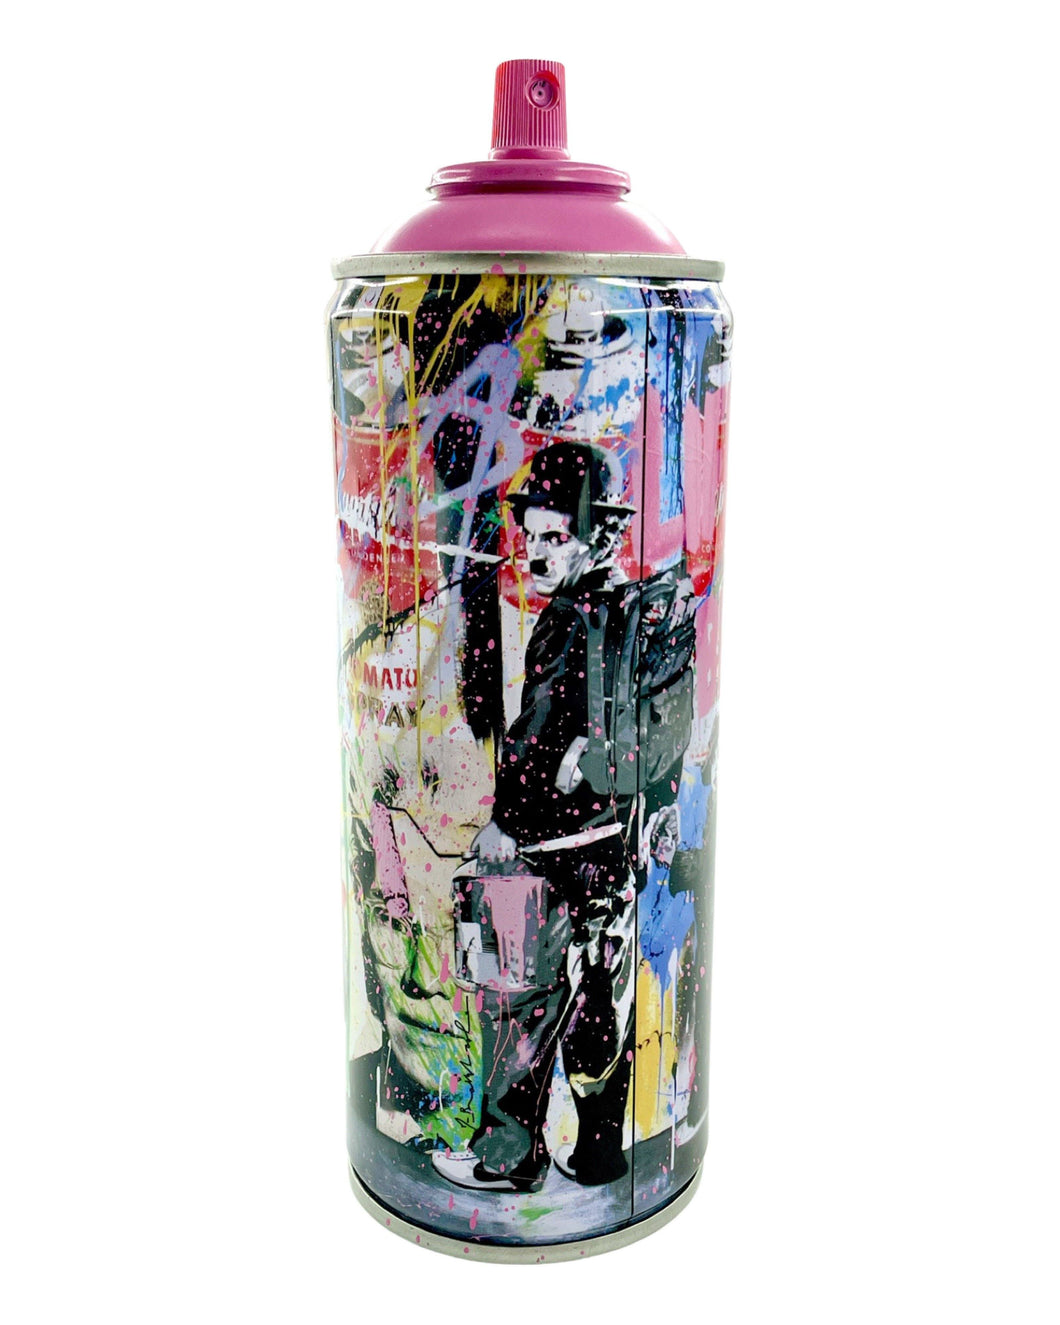 Just Kidding (Pink) Spray Can Spray Paint Can Mr. Brainwash